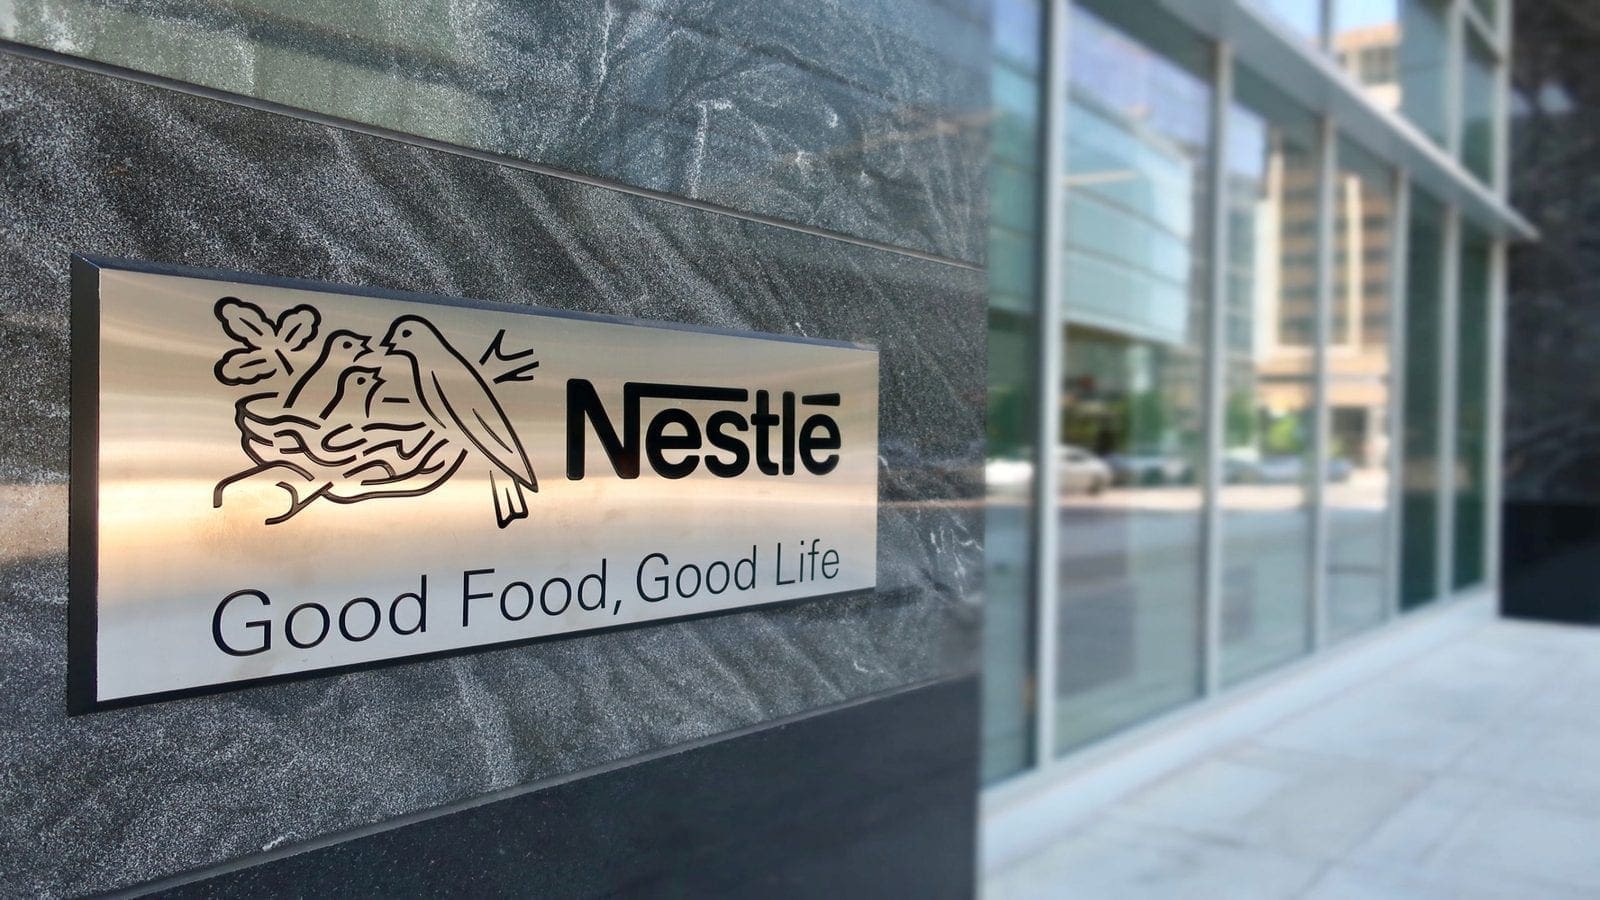 Nestlé posts 7.7% organic growth in Q1 as Heineken remains resilient amid mounting challenges